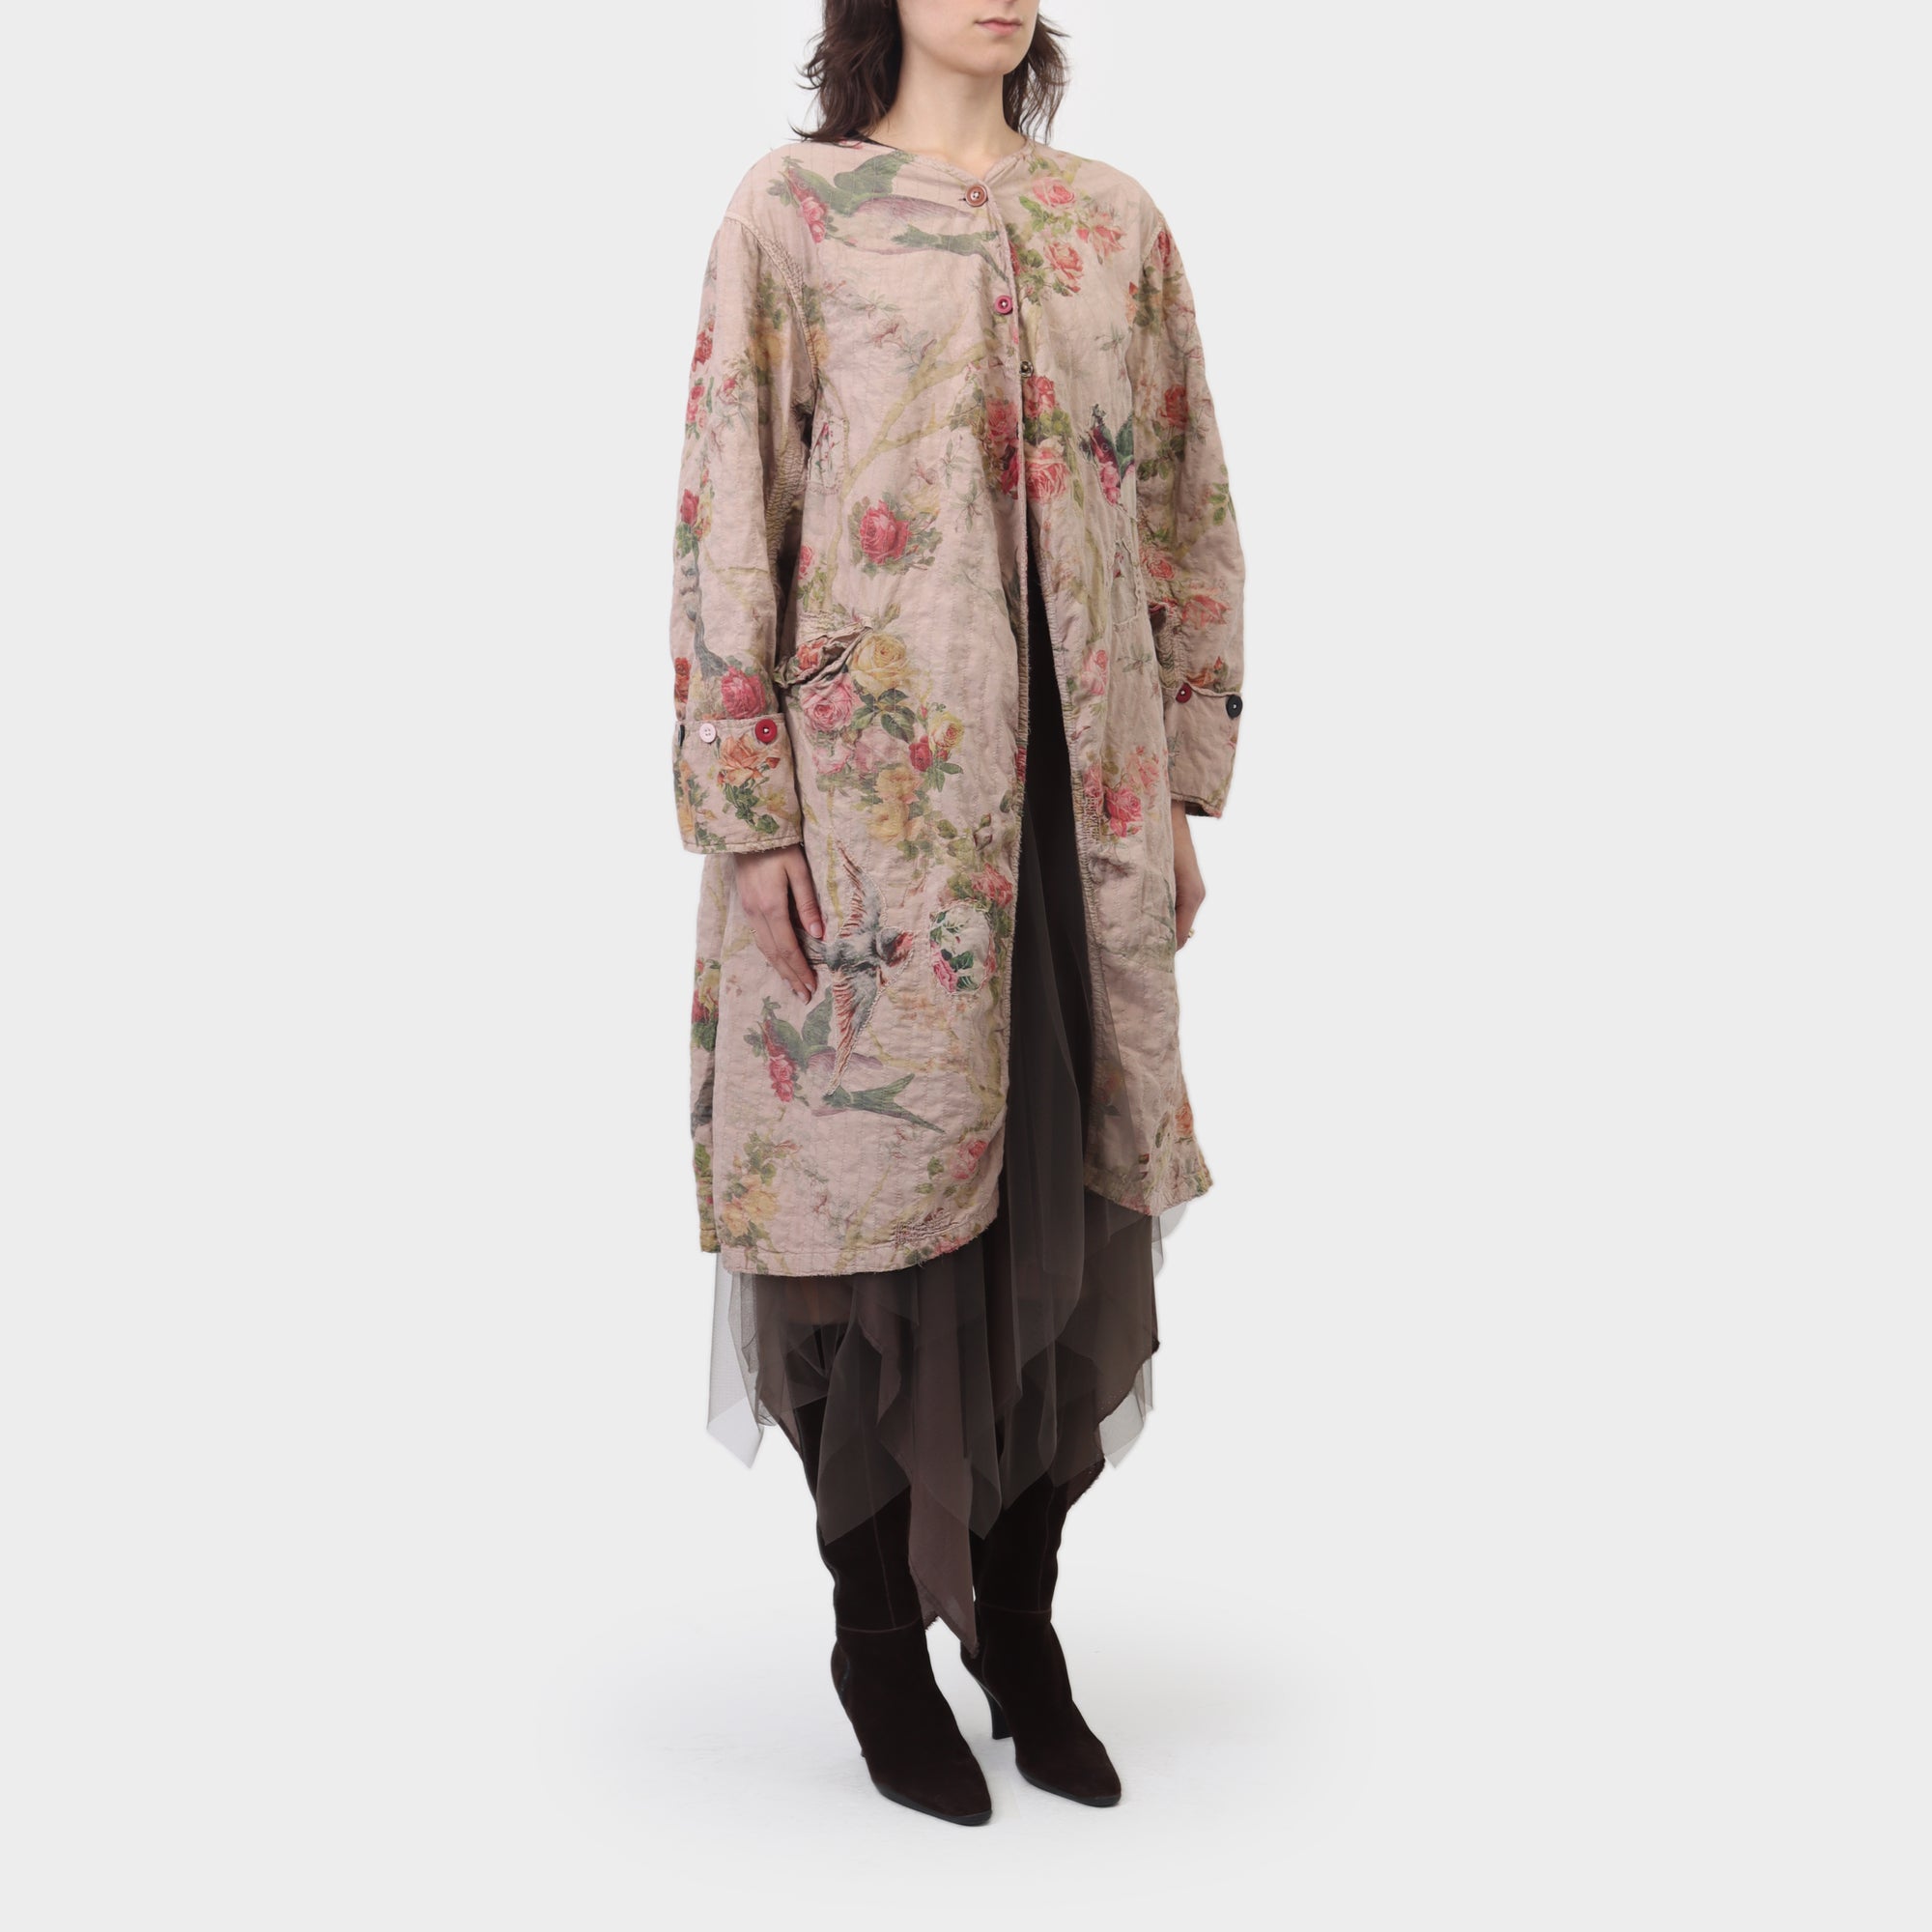 Magnolia Pearl Up Cycled Floral Coat